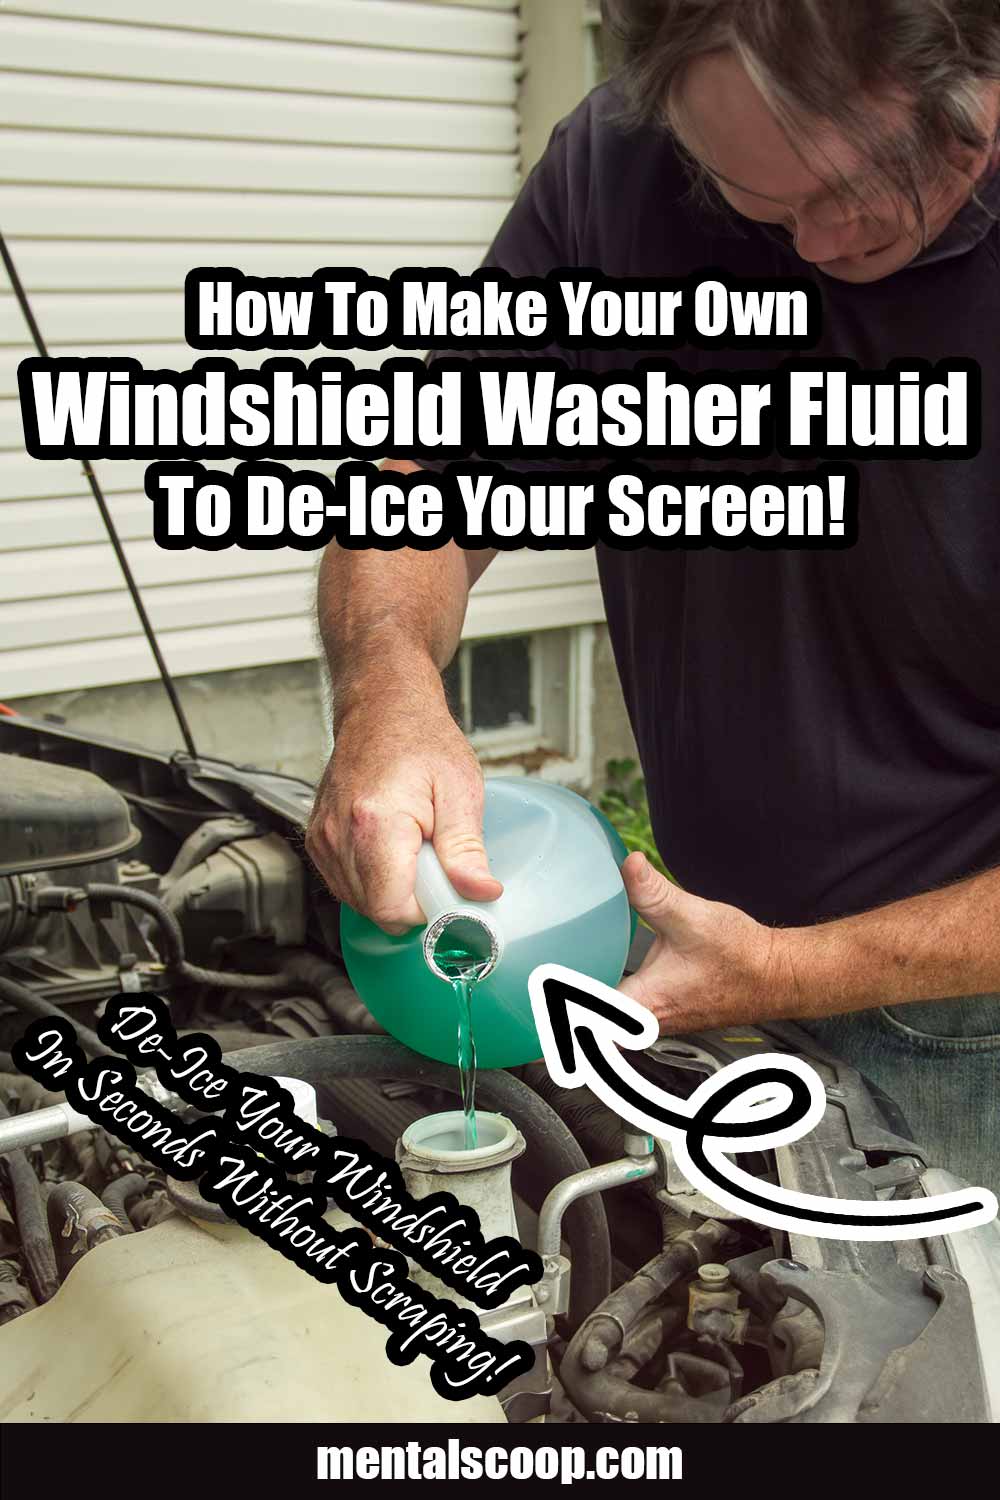 How To Make Your Own Windshield Washer Fluid To De-Ice Your Screen! -  Mental Scoop